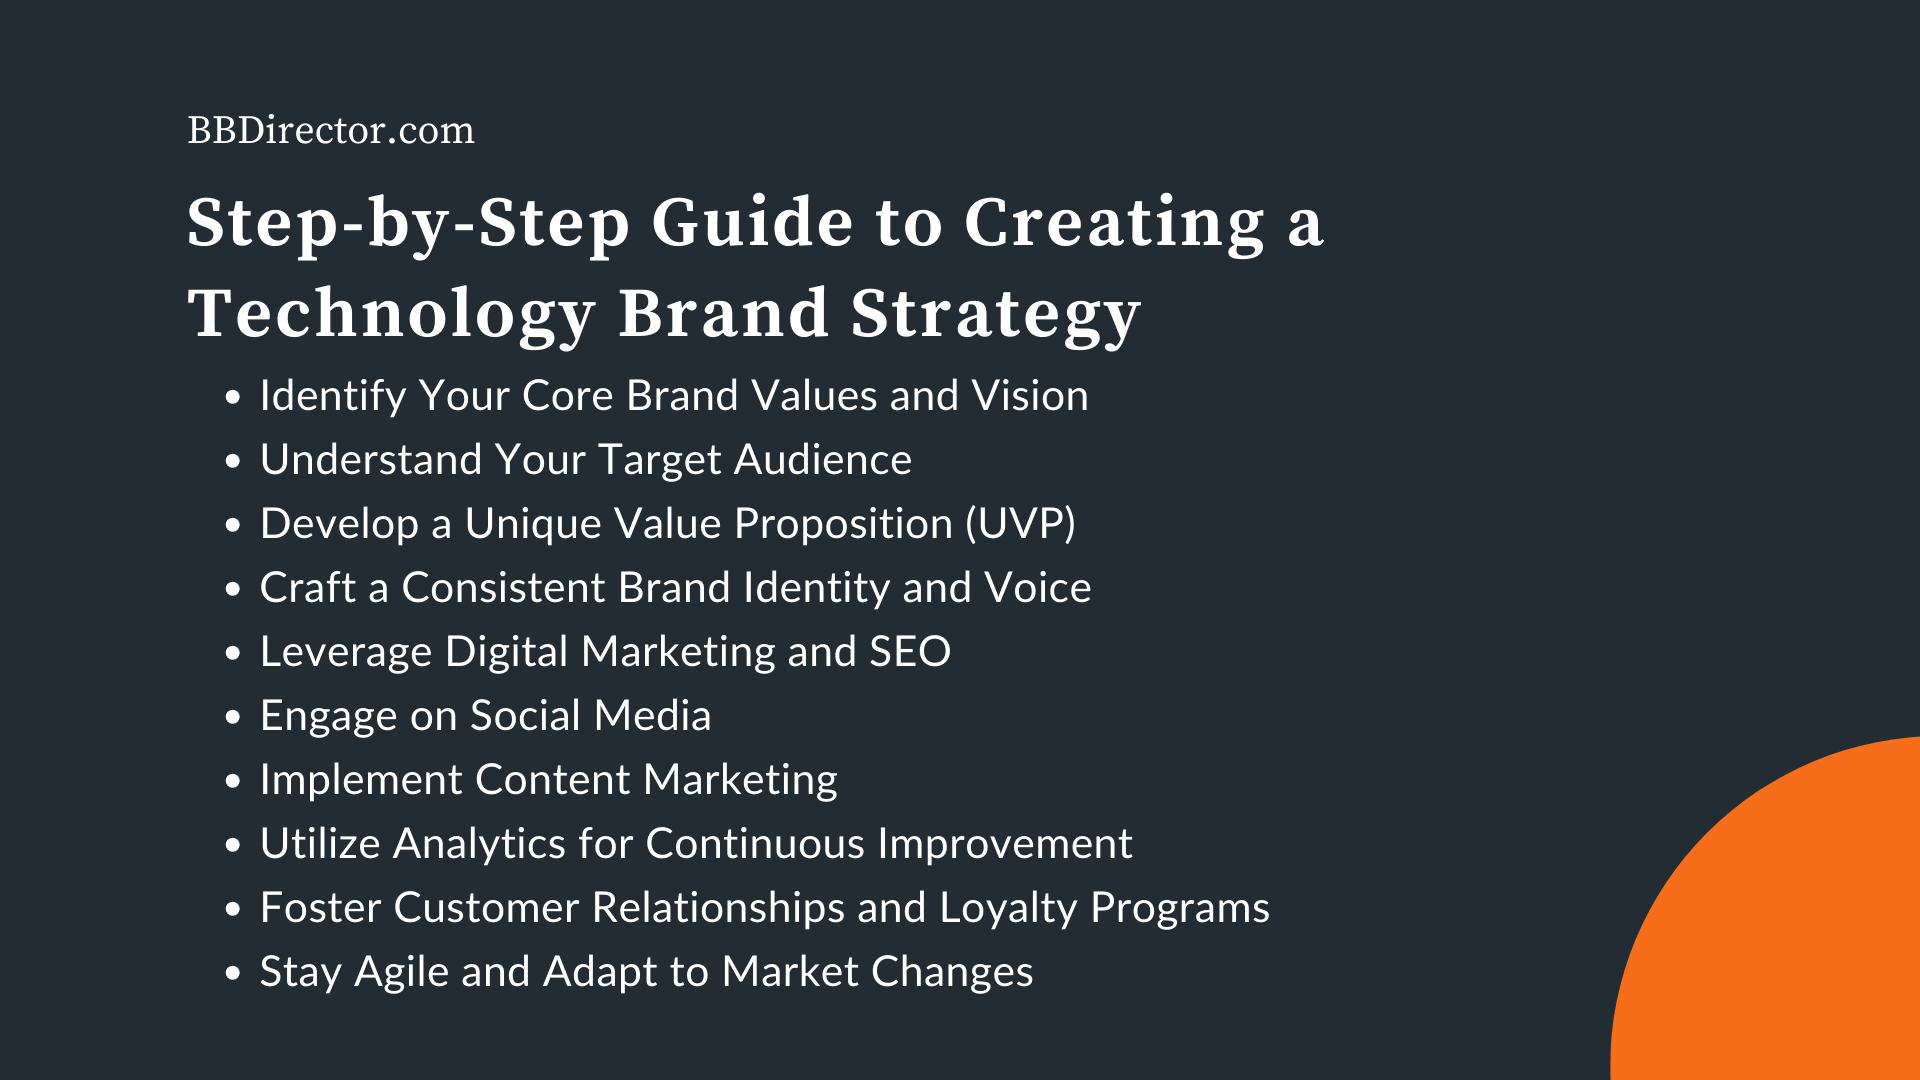 Step-by-Step Guide to Creating a Technology Brand Strategy